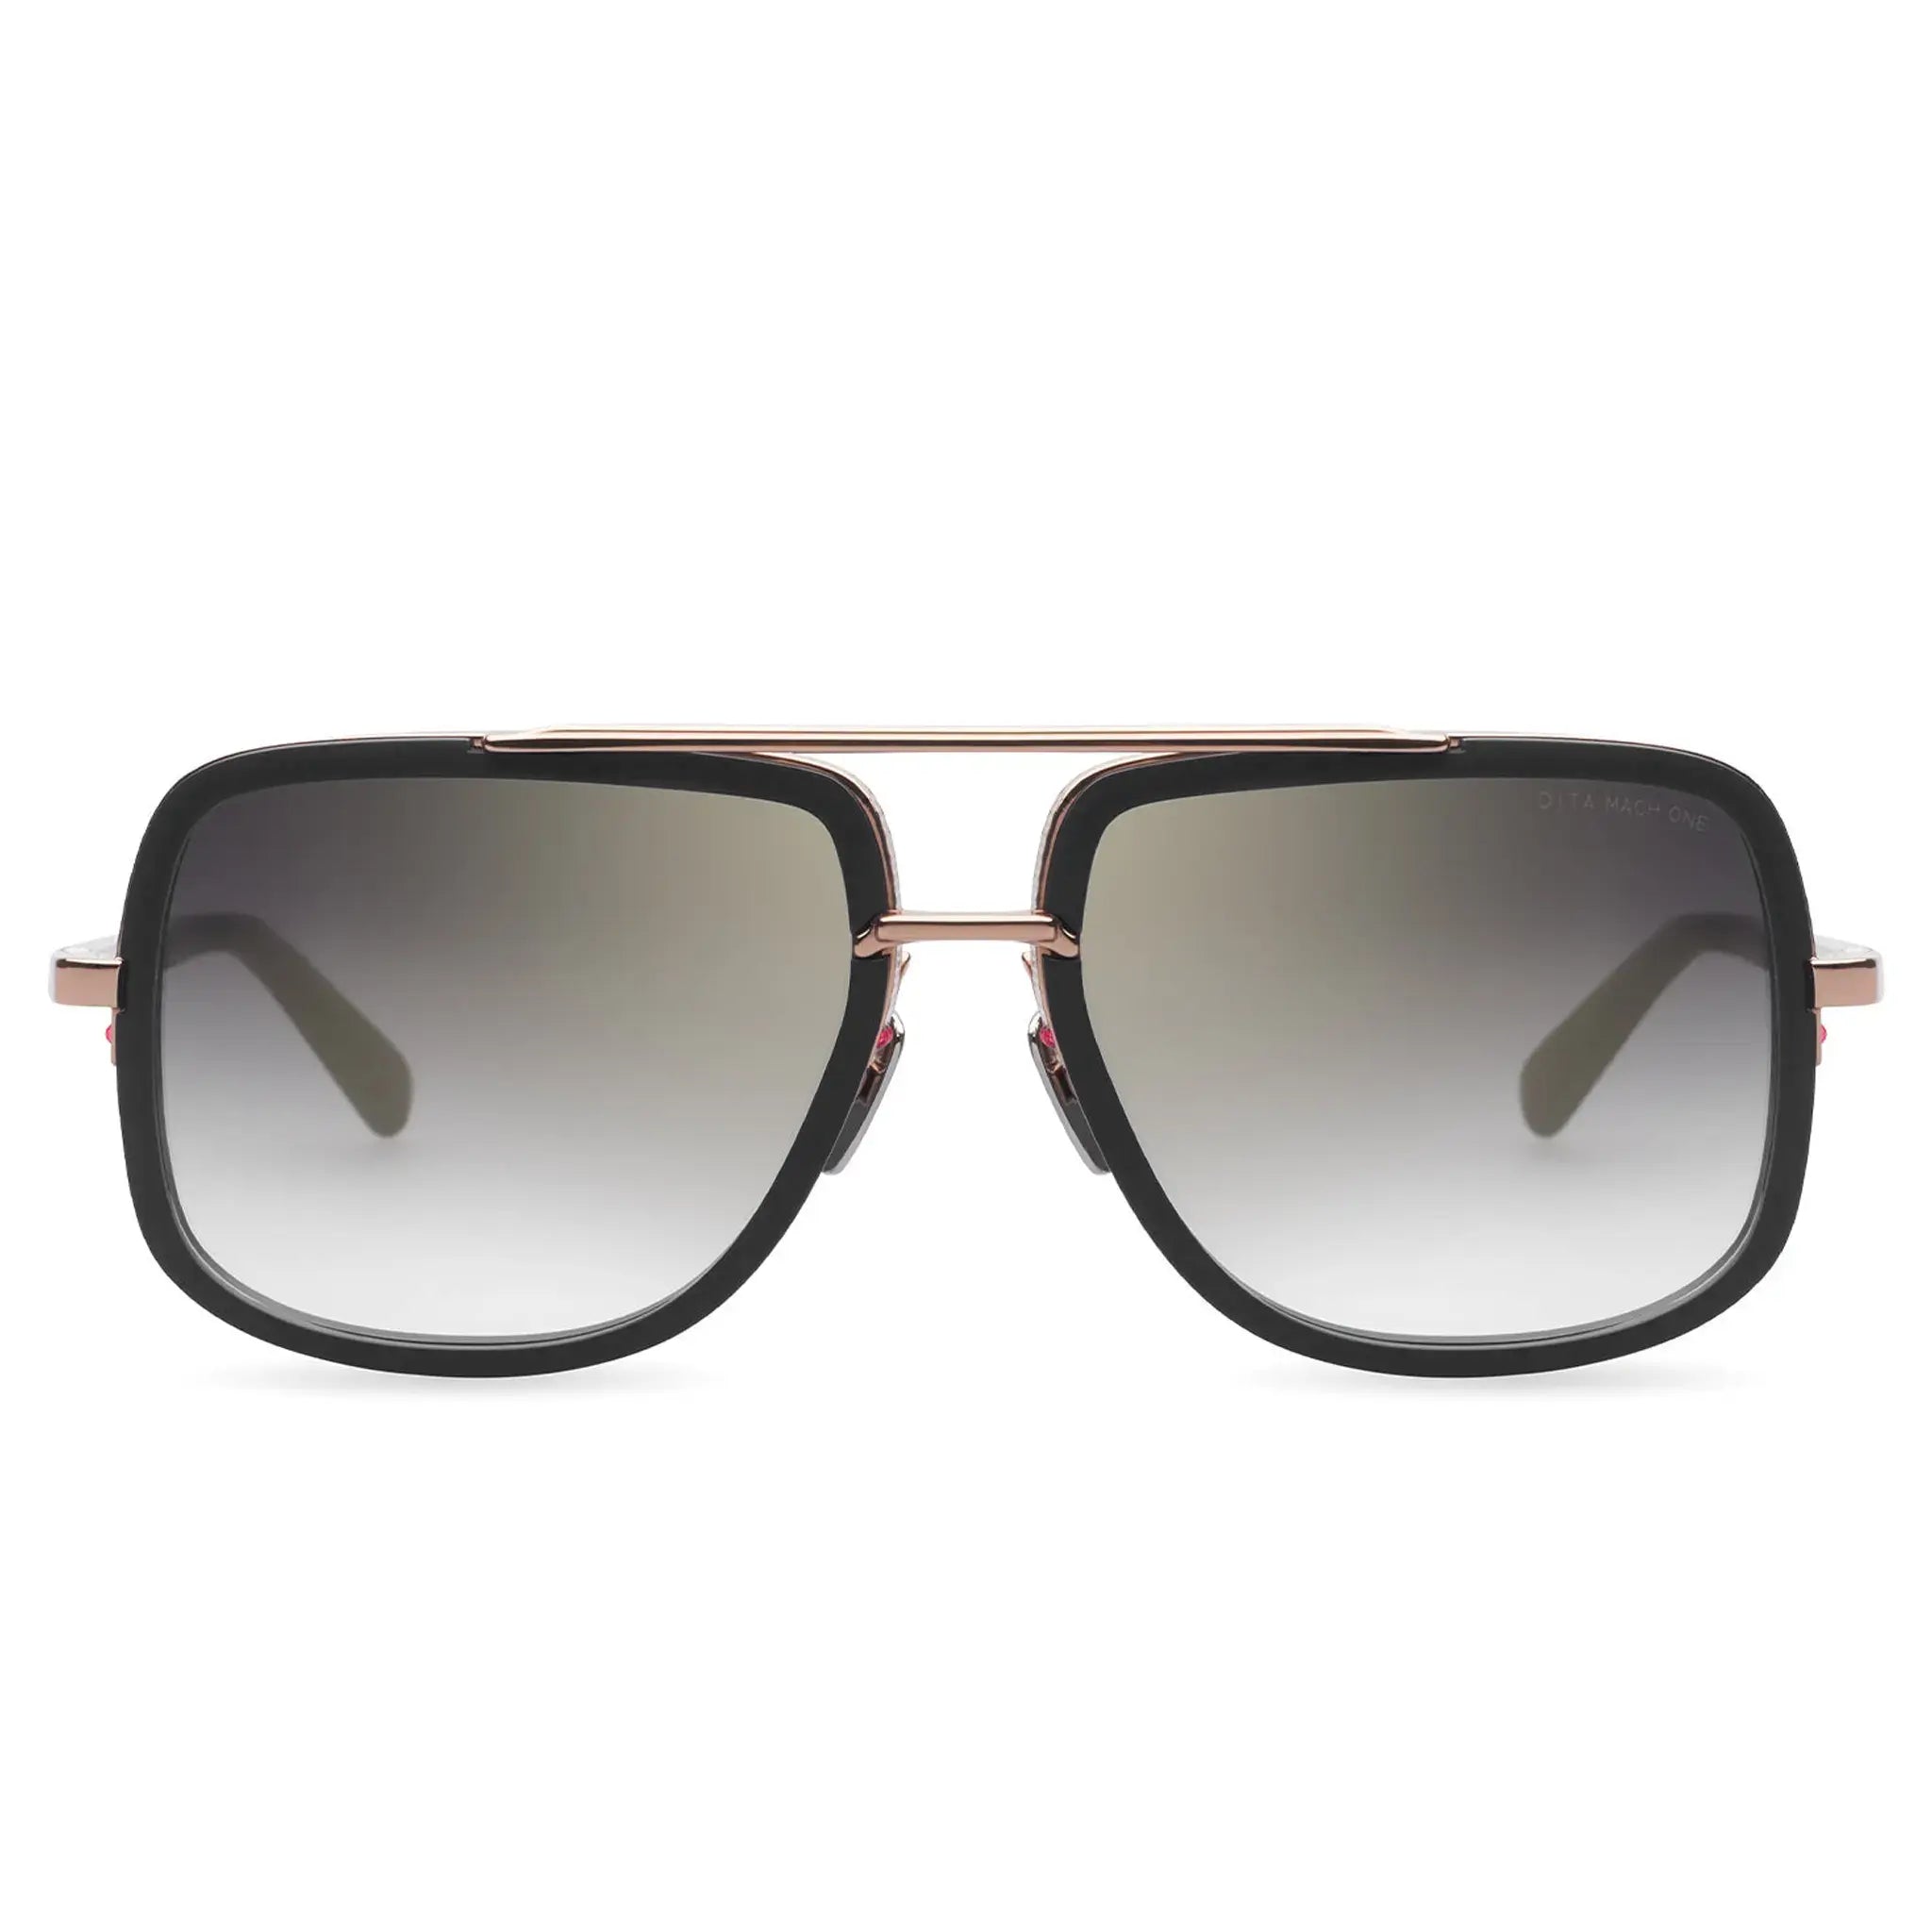 Front view of Dita Eyewear DRX-2030 Mach One Matte Black Rose Gold Sunglasses DRX-2030-L-BLK-RGD-59